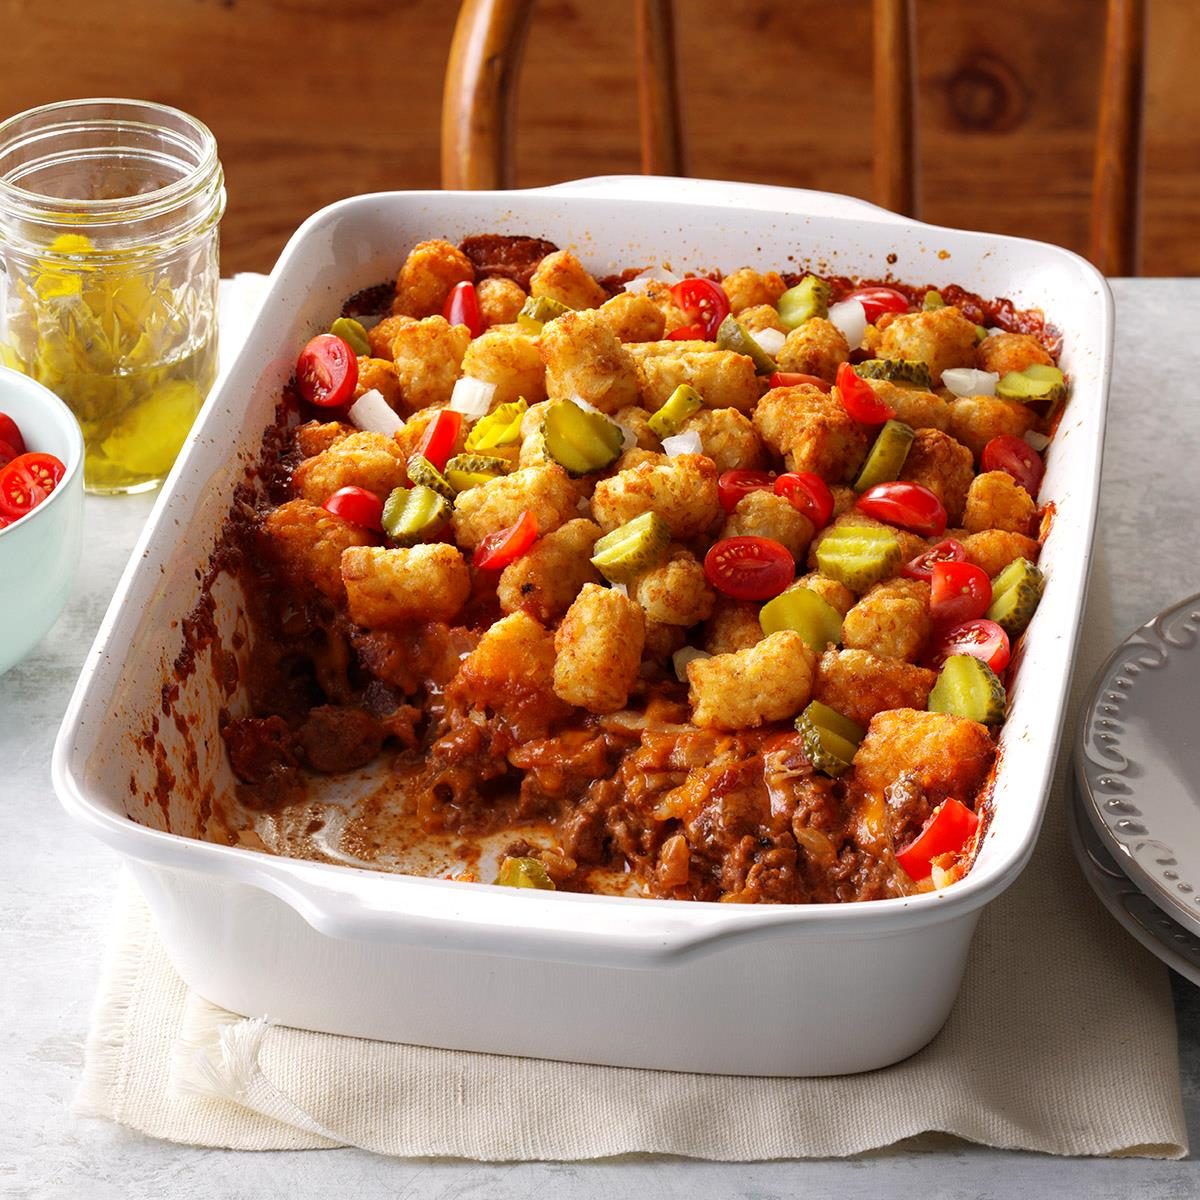 <p>This bacon cheeseburger <a href="https://www.tasteofhome.com/recipes/quick-tater-tot-bake/">tater tot casserole</a> is the perfect dish to bribe your kids; homework, chores, piano practice—consider them done! —Deanna Zewen, Union Grove, Wisconsin</p> <div class="listicle-page__buttons"> <div class="listicle-page__cta-button"><a href='https://www.tasteofhome.com/recipes/bacon-cheeseburger-tater-tot-bake/'>Get Recipe</a></div> </div>